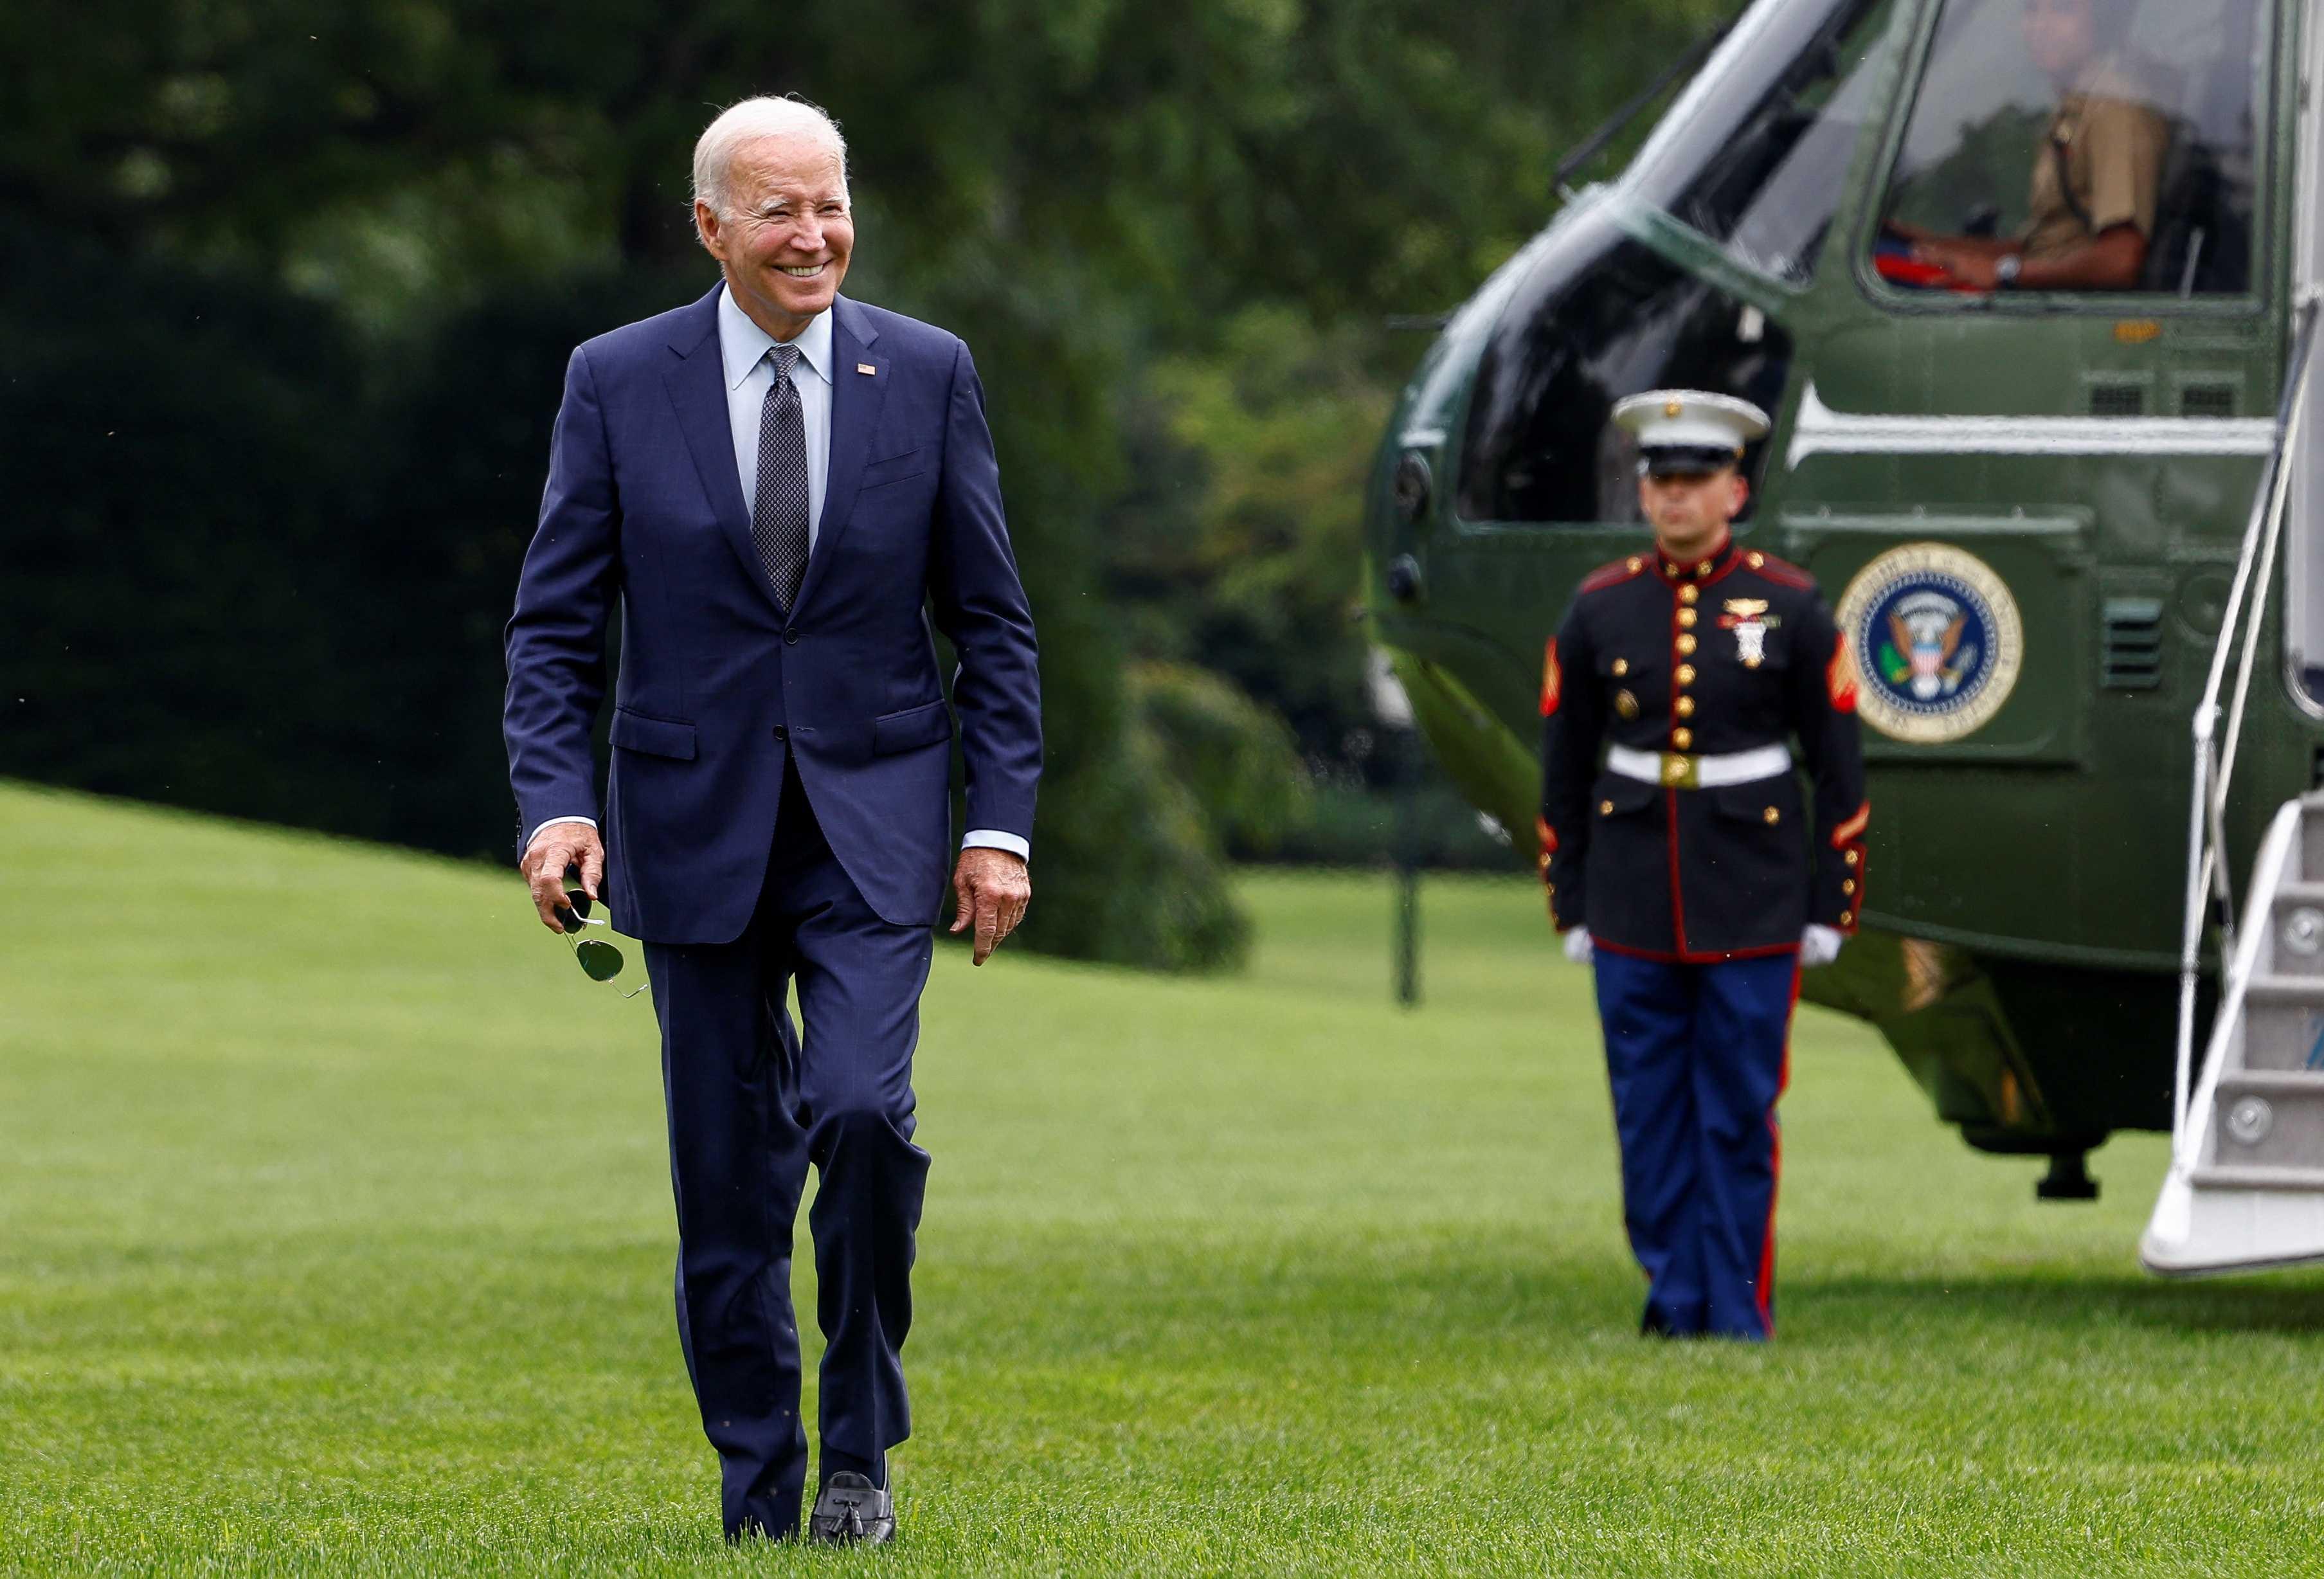 US President Joe Biden walks to the White House from Marine One on the South Lawn of the White House in Washington, US, Sept 17. Photo: Reuters